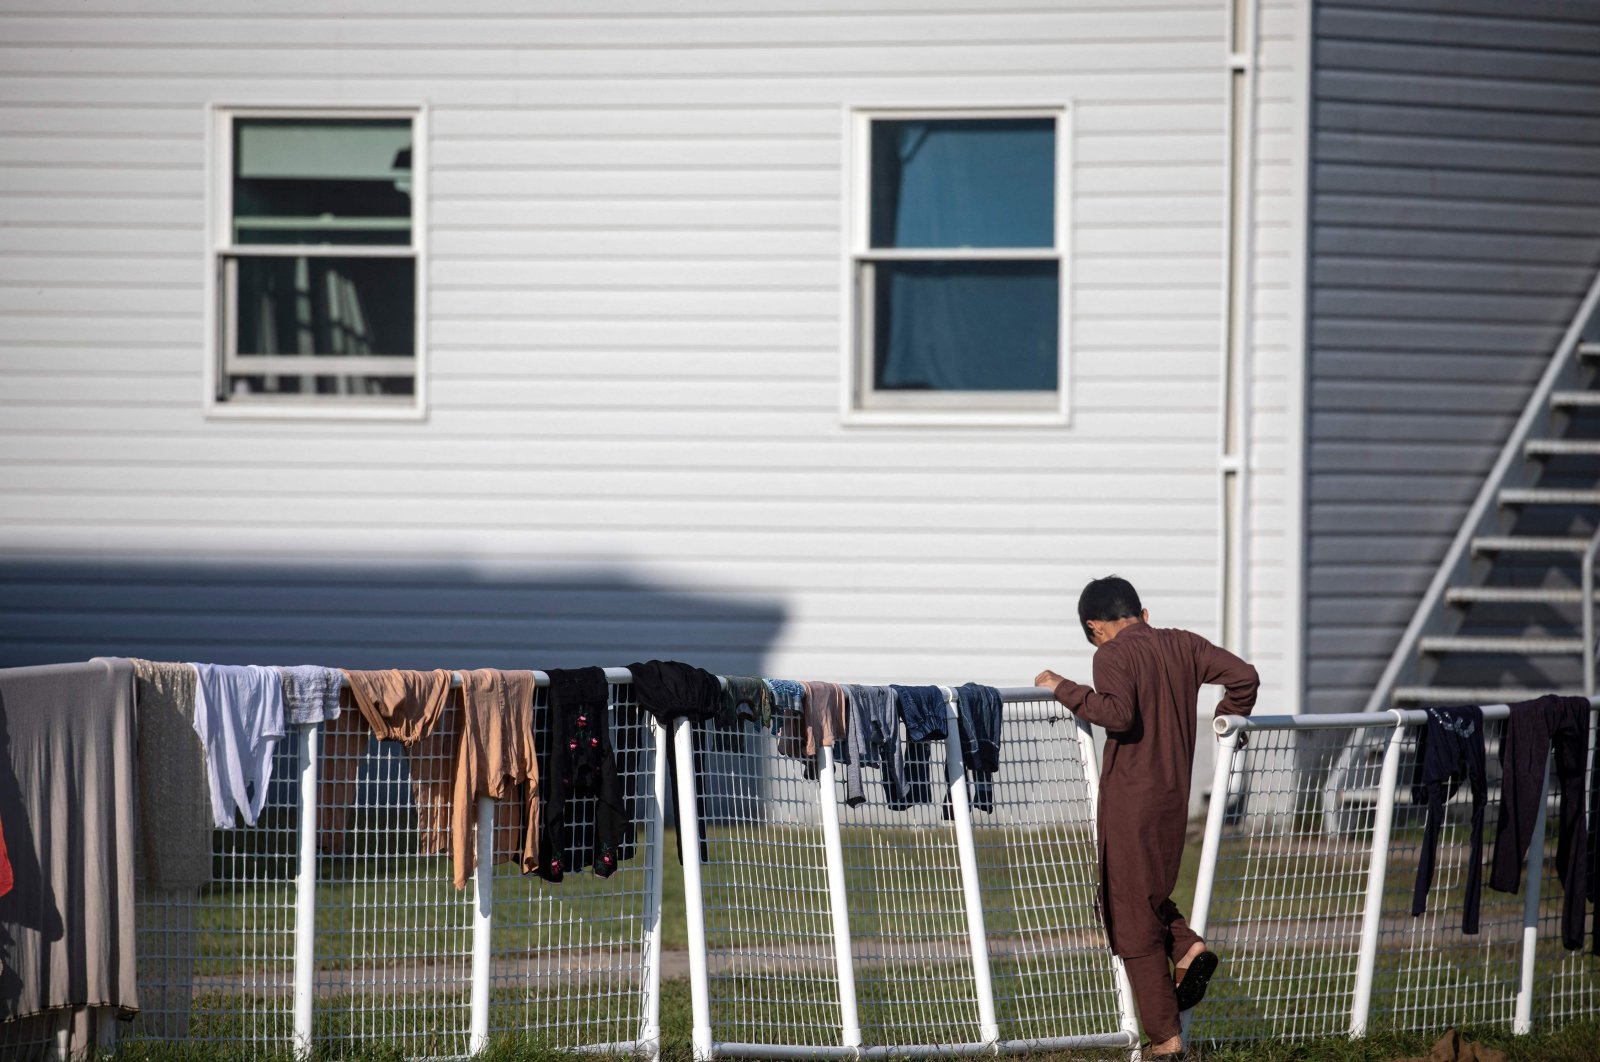 An Afghan refugee stands outside temporary housing at Ft. McCoy U.S. Army base, Sept. 30, 2021 in Ft. McCoy, Wisconsin, U.S. (AFP Photo)